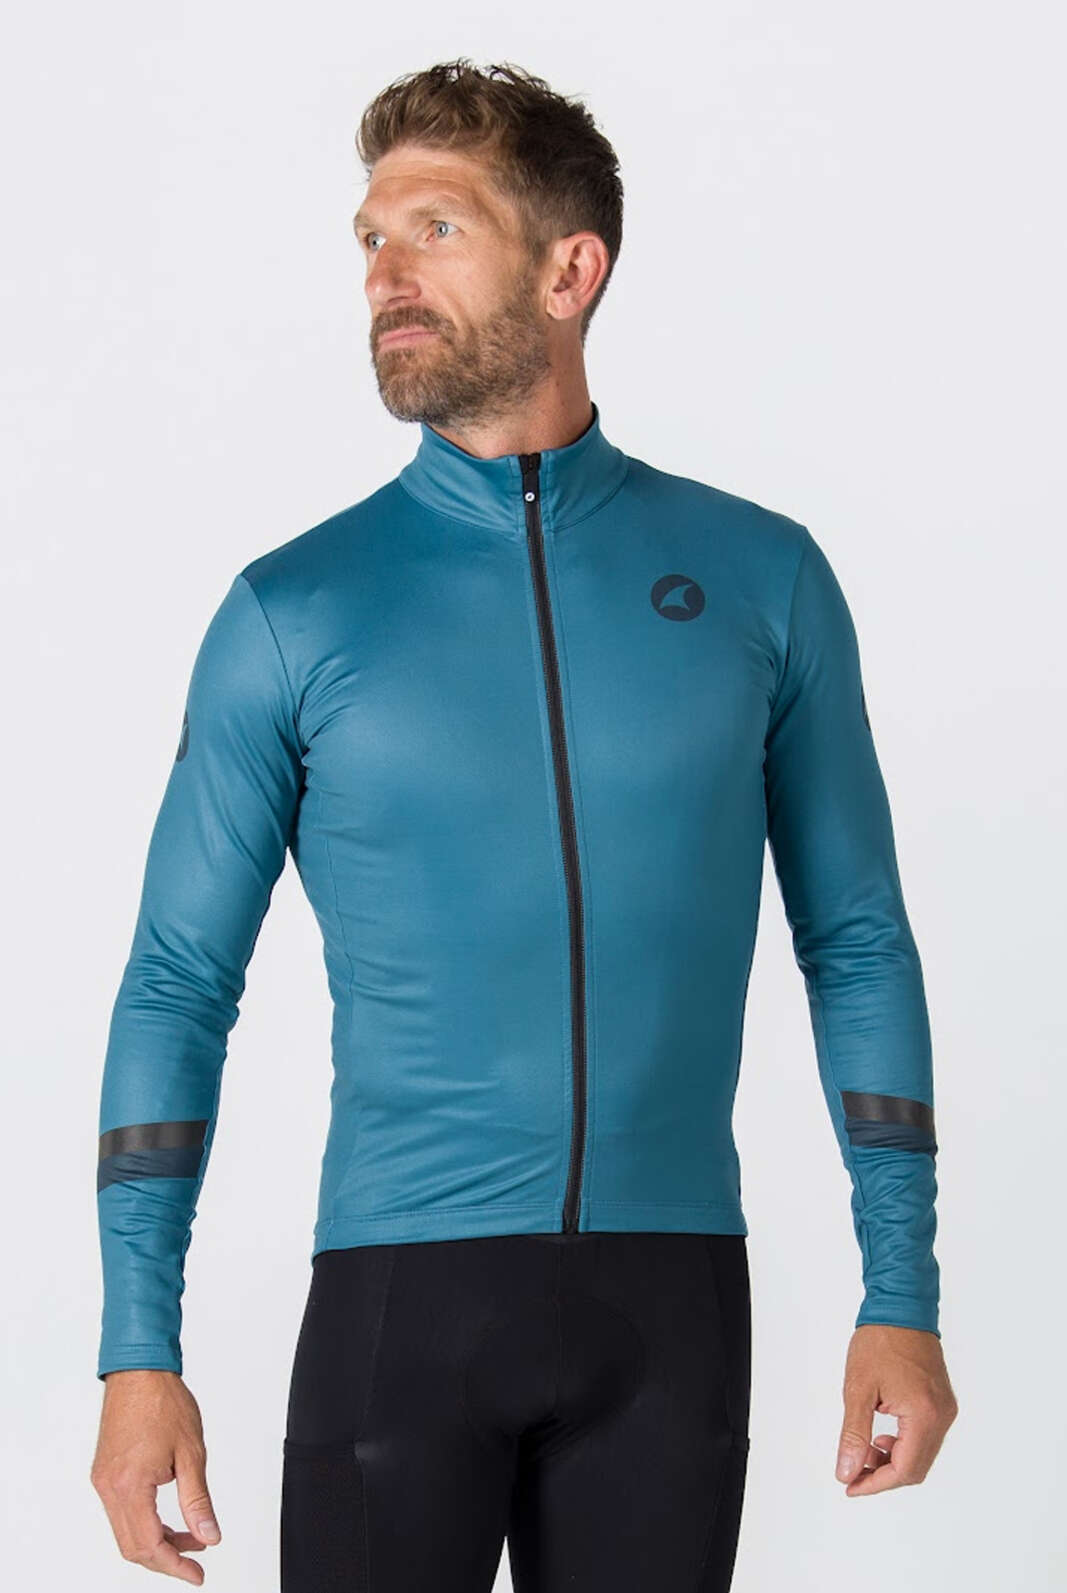 Men's Blue Thermal Cycling Jersey - Front View